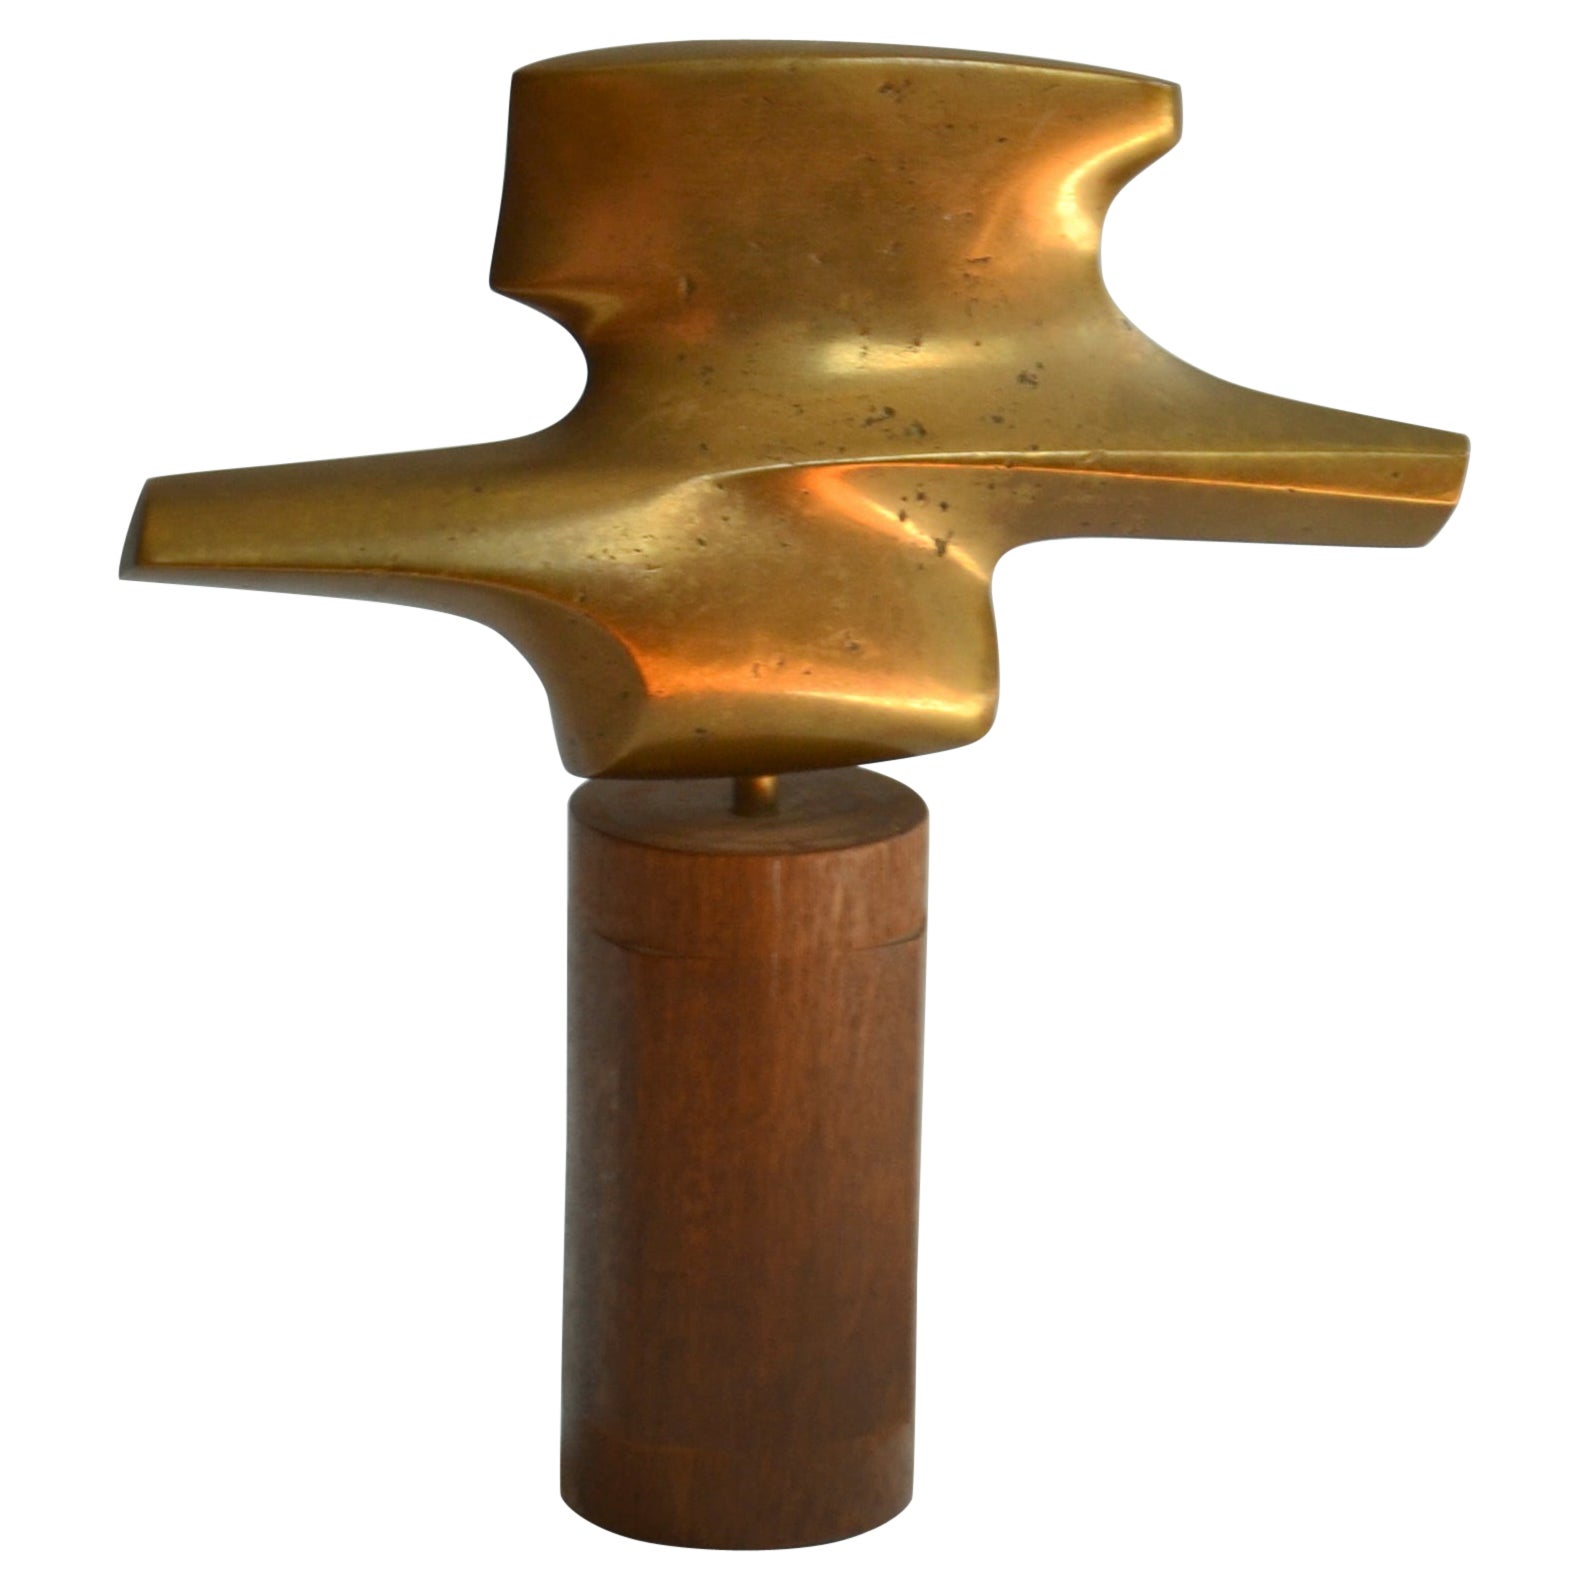 Abstract bronze cast sculpture on teak pedestal suggesting a bird in flight. The aerodynamic form gives the impression of sustaining flight around the gleaming gold surface of this abstract expression.
Abstract bronze cast sculpture Dutch 1970's is